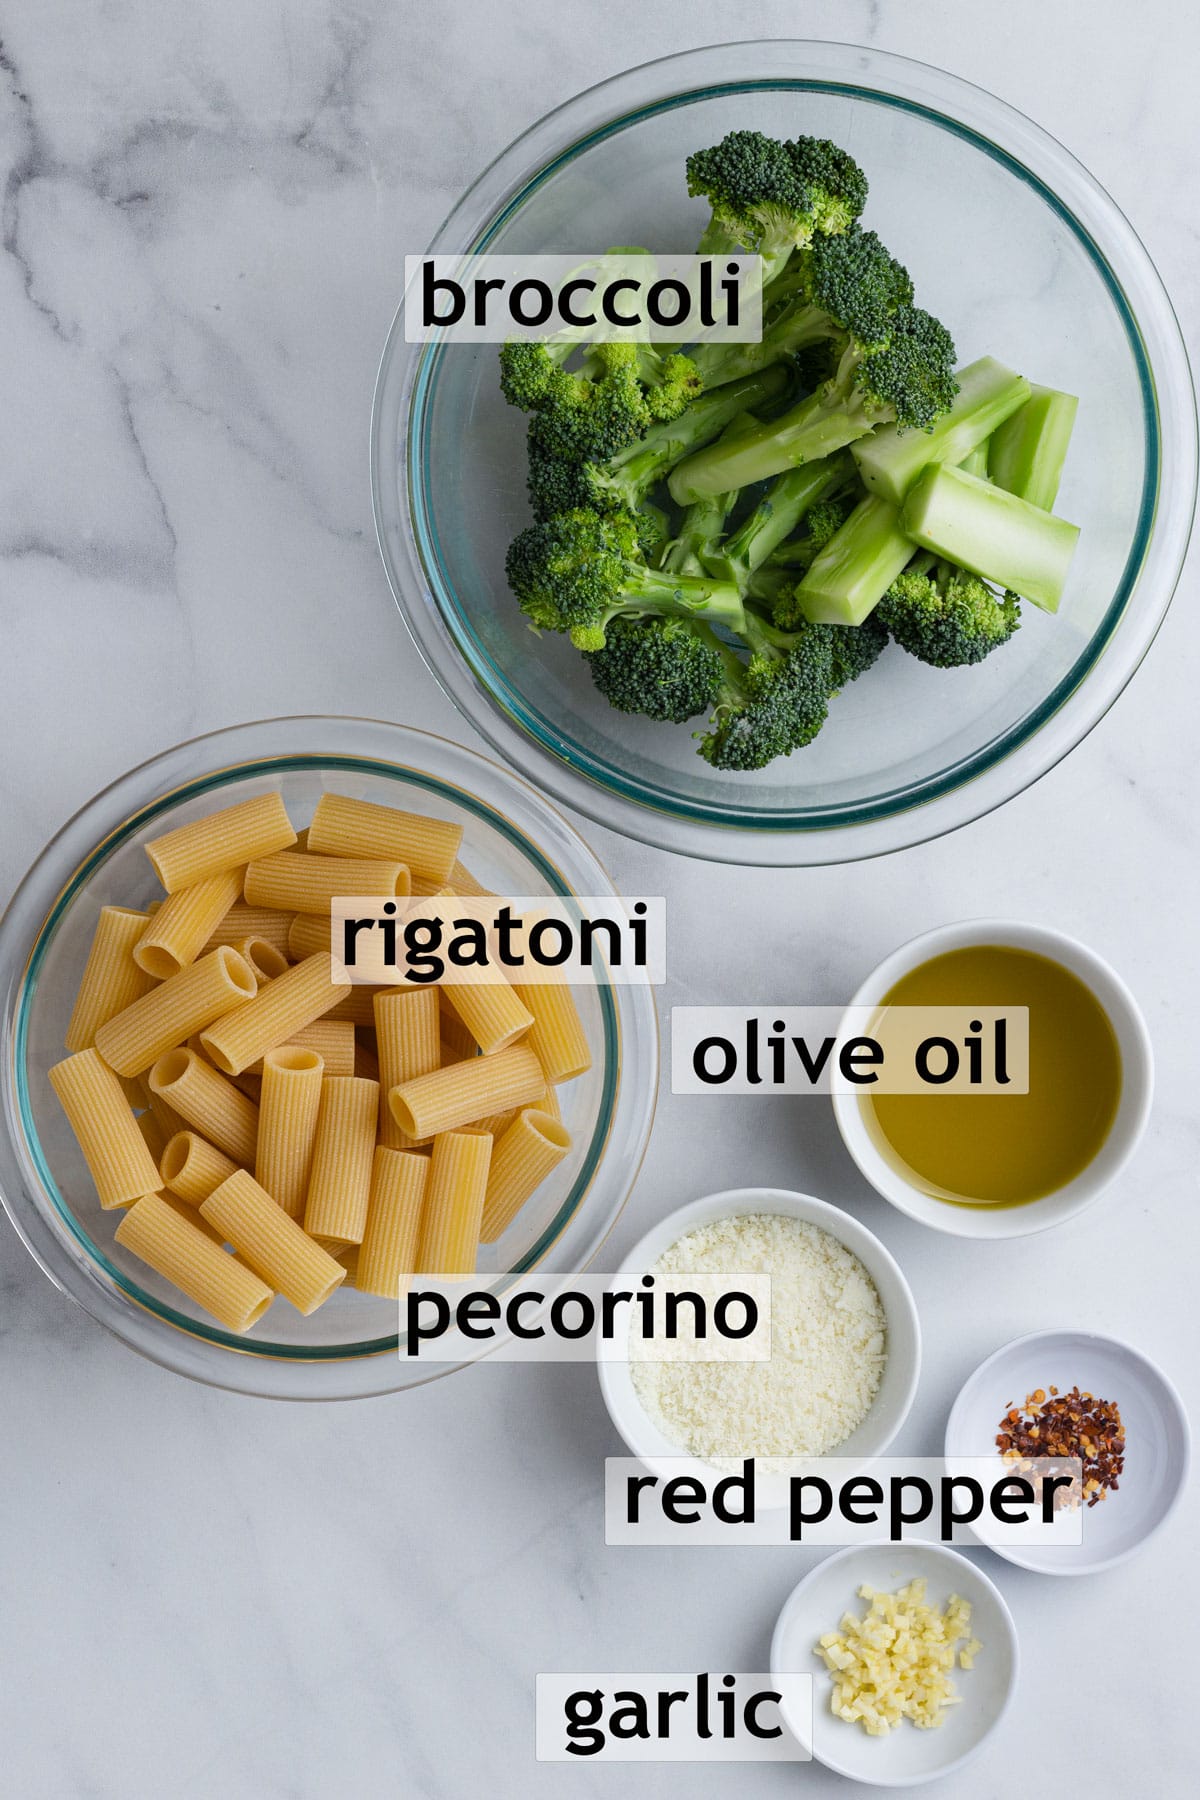 Ingredients, including broccoli, rigatoni pasta, olive oil, pecorino cheese, red pepper and garlic.